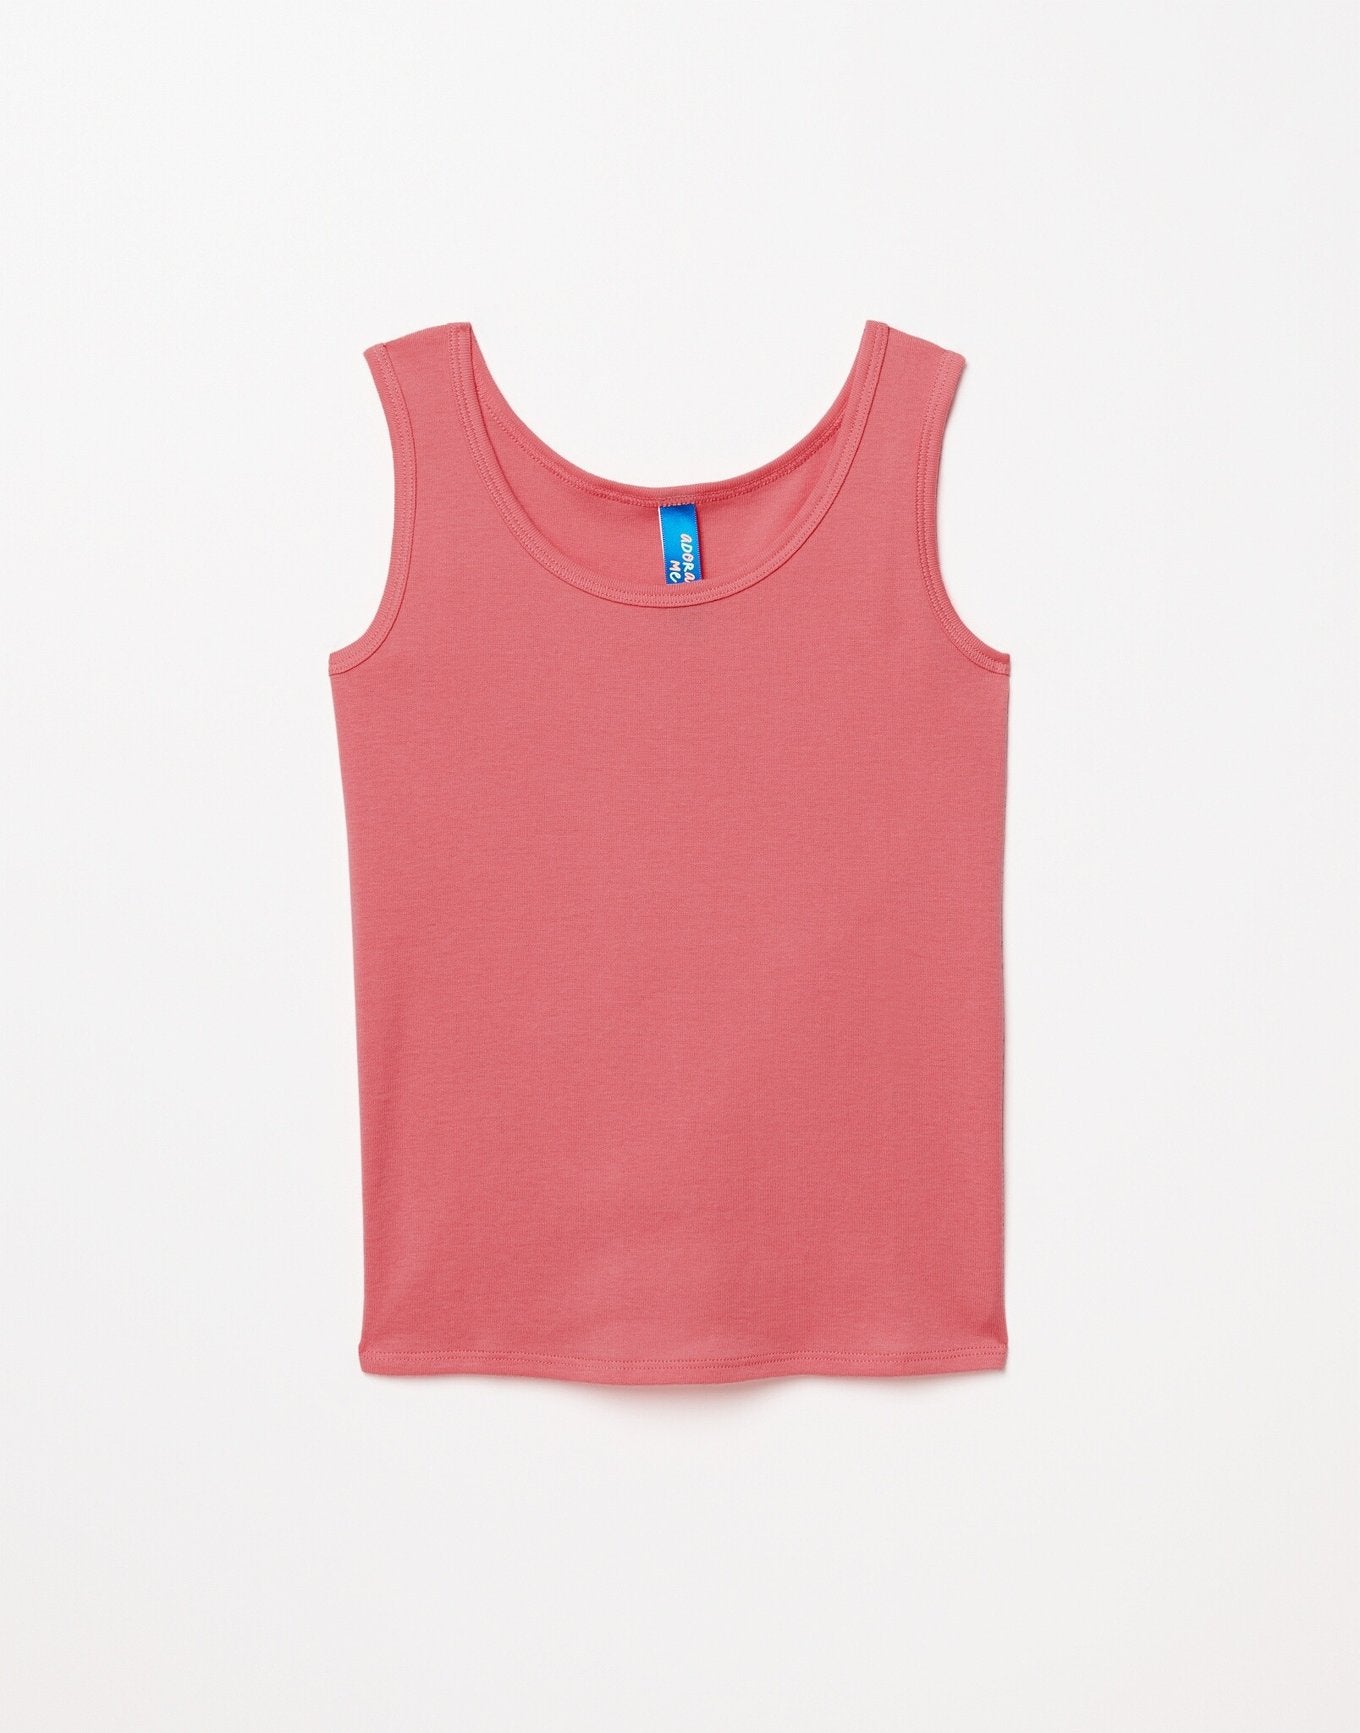 Outlines Kids Arinna in color Tea Rose and shape tank